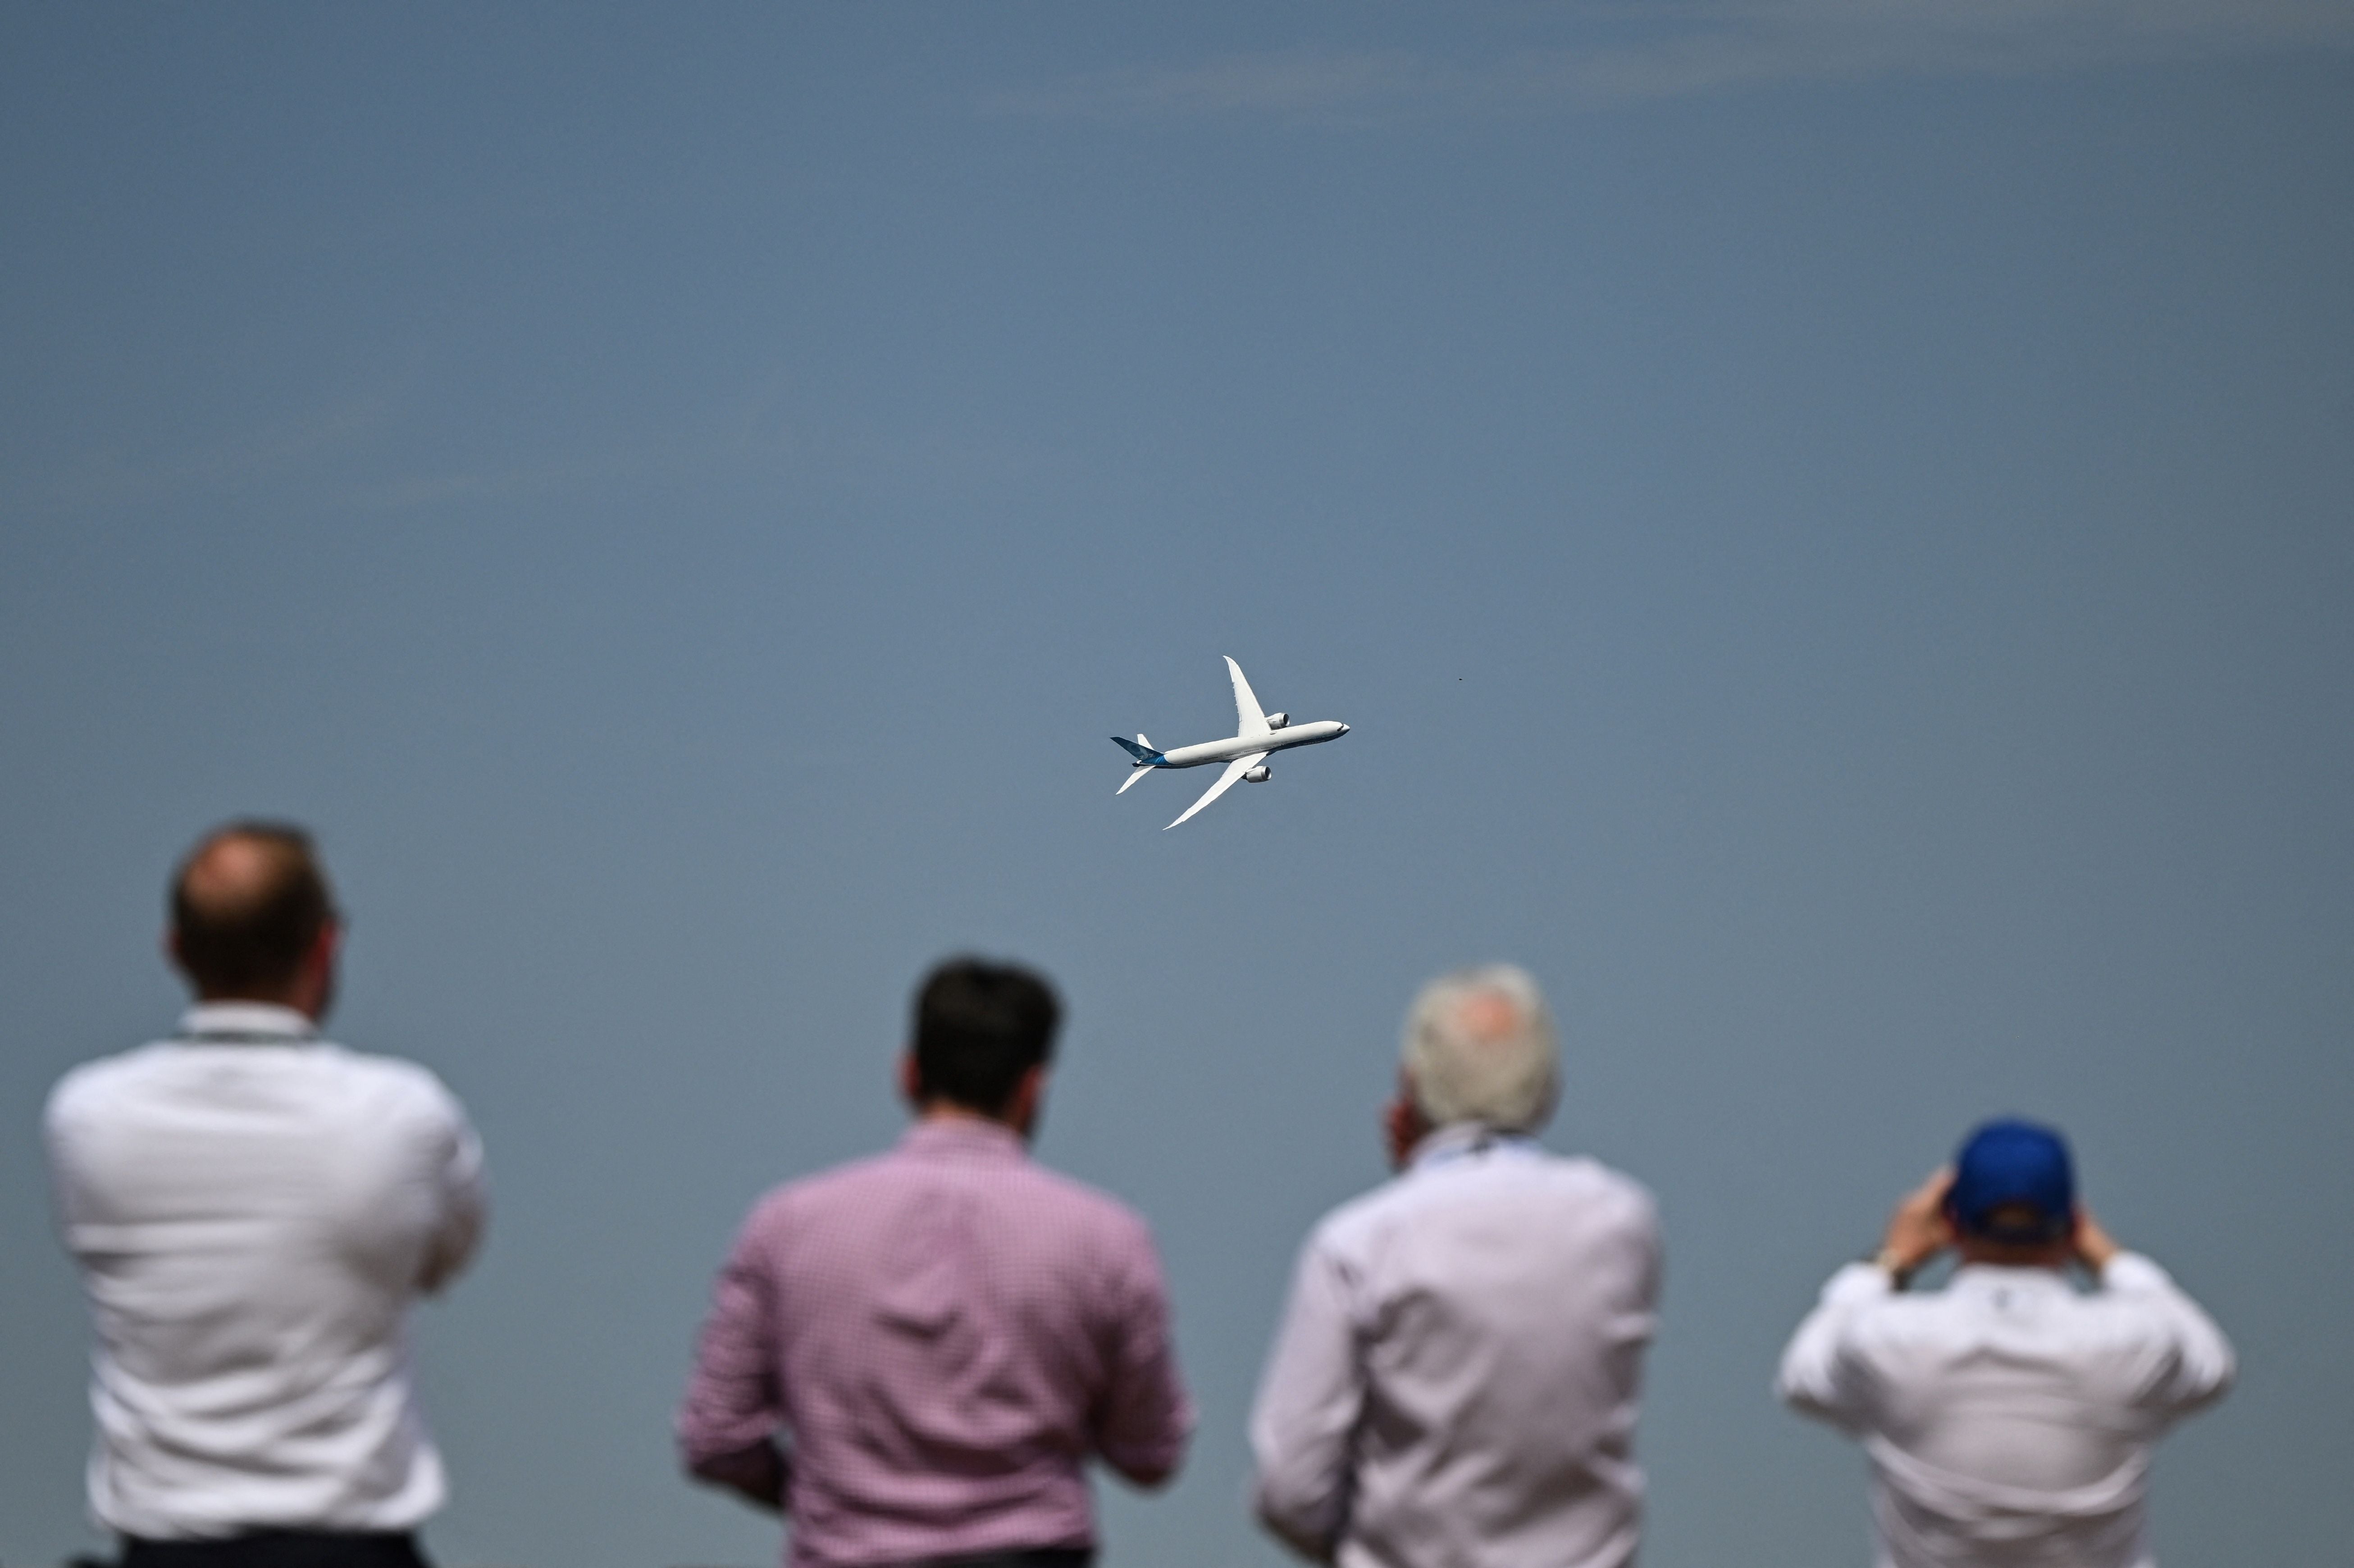 People watch a Boeing aeroplane at Farnborough Air Show on Tuesday where the government launched its new aviation strategy